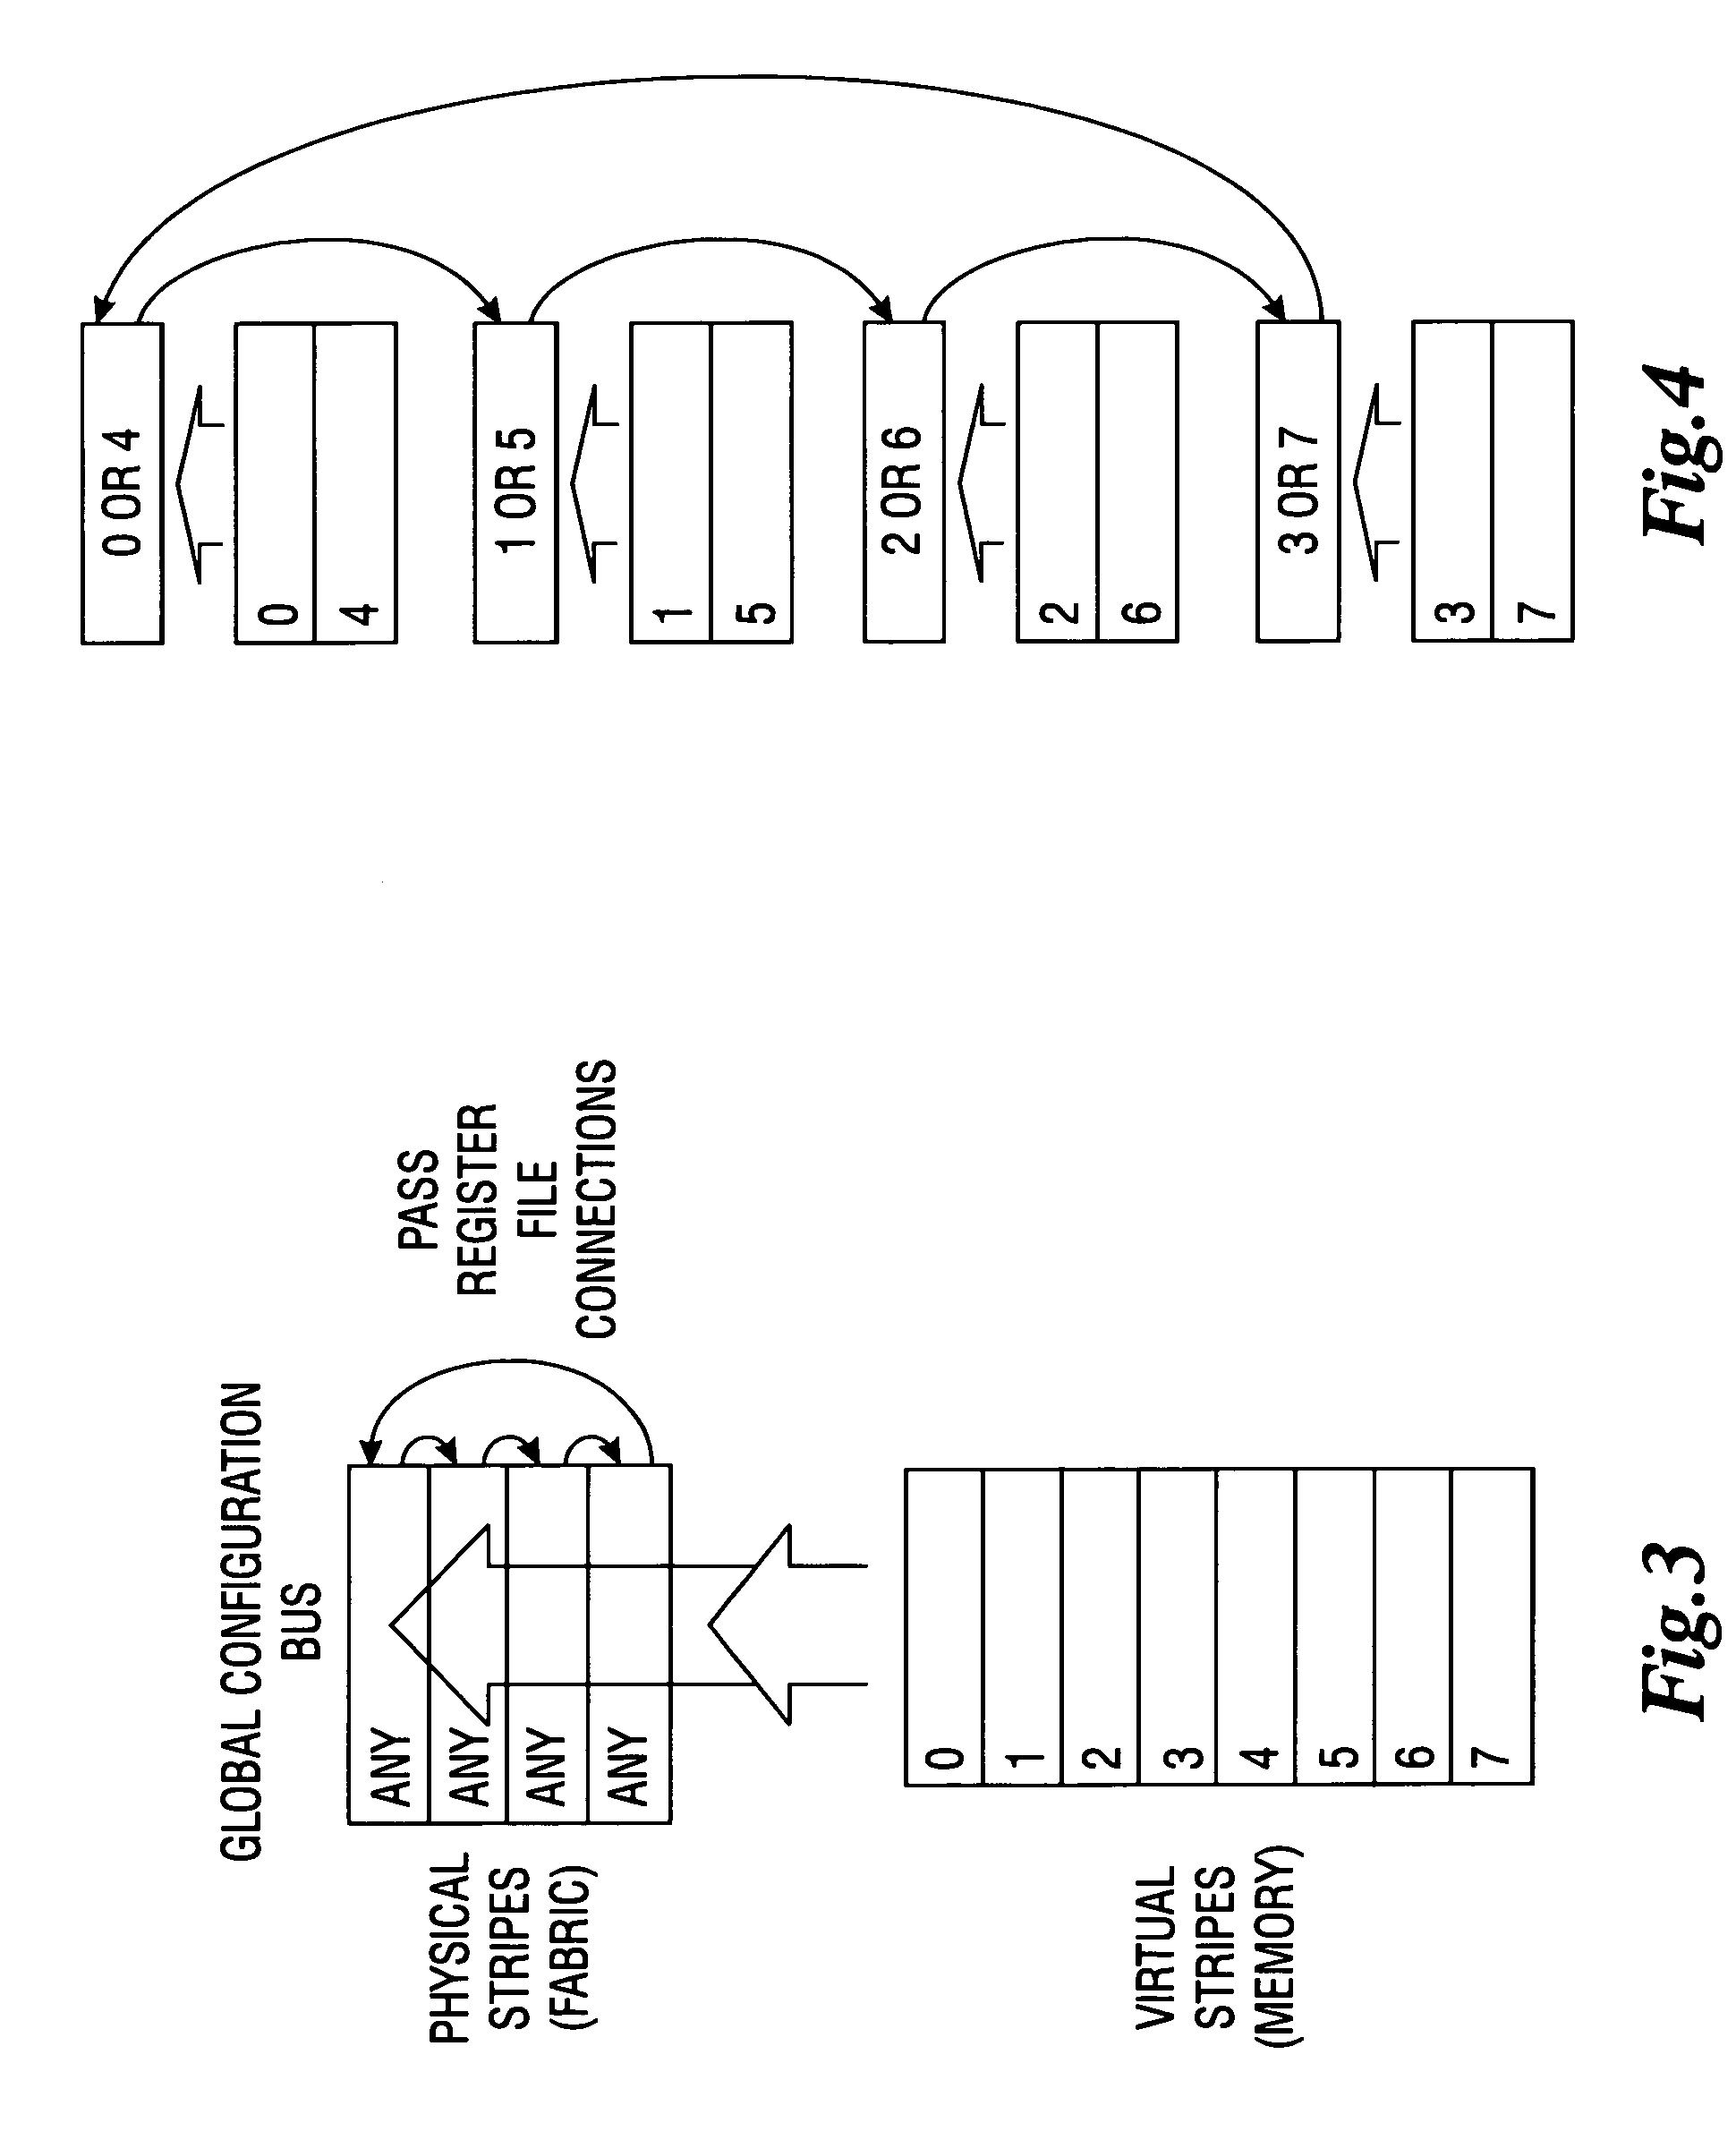 Programmable pipeline fabric utilizing partially global configuration buses